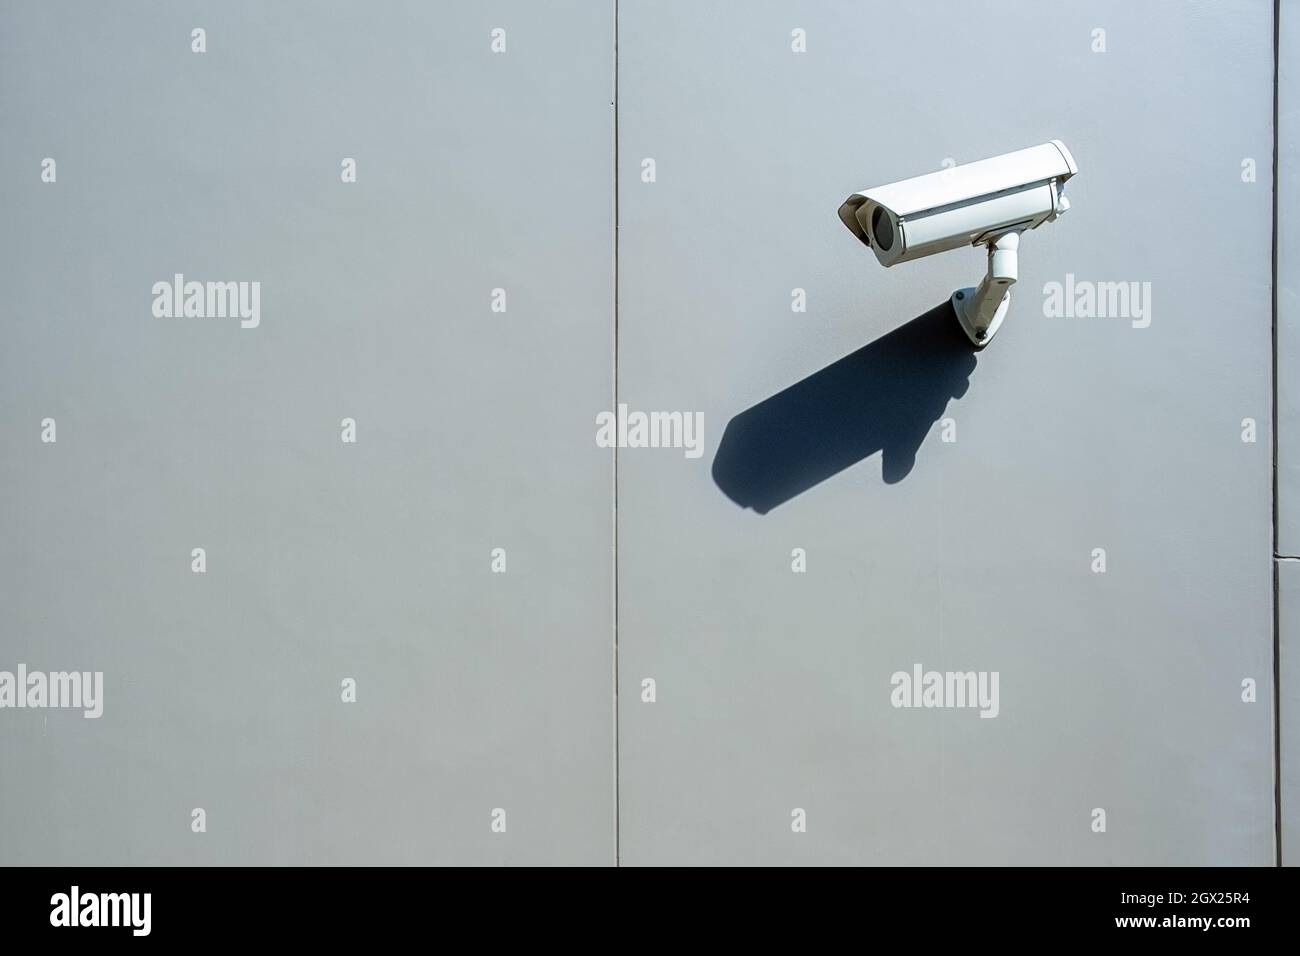 Surveillance Wall Mounted Outdoor Camera With Harsh Daylight Shadow And Copy Space Stock Photo